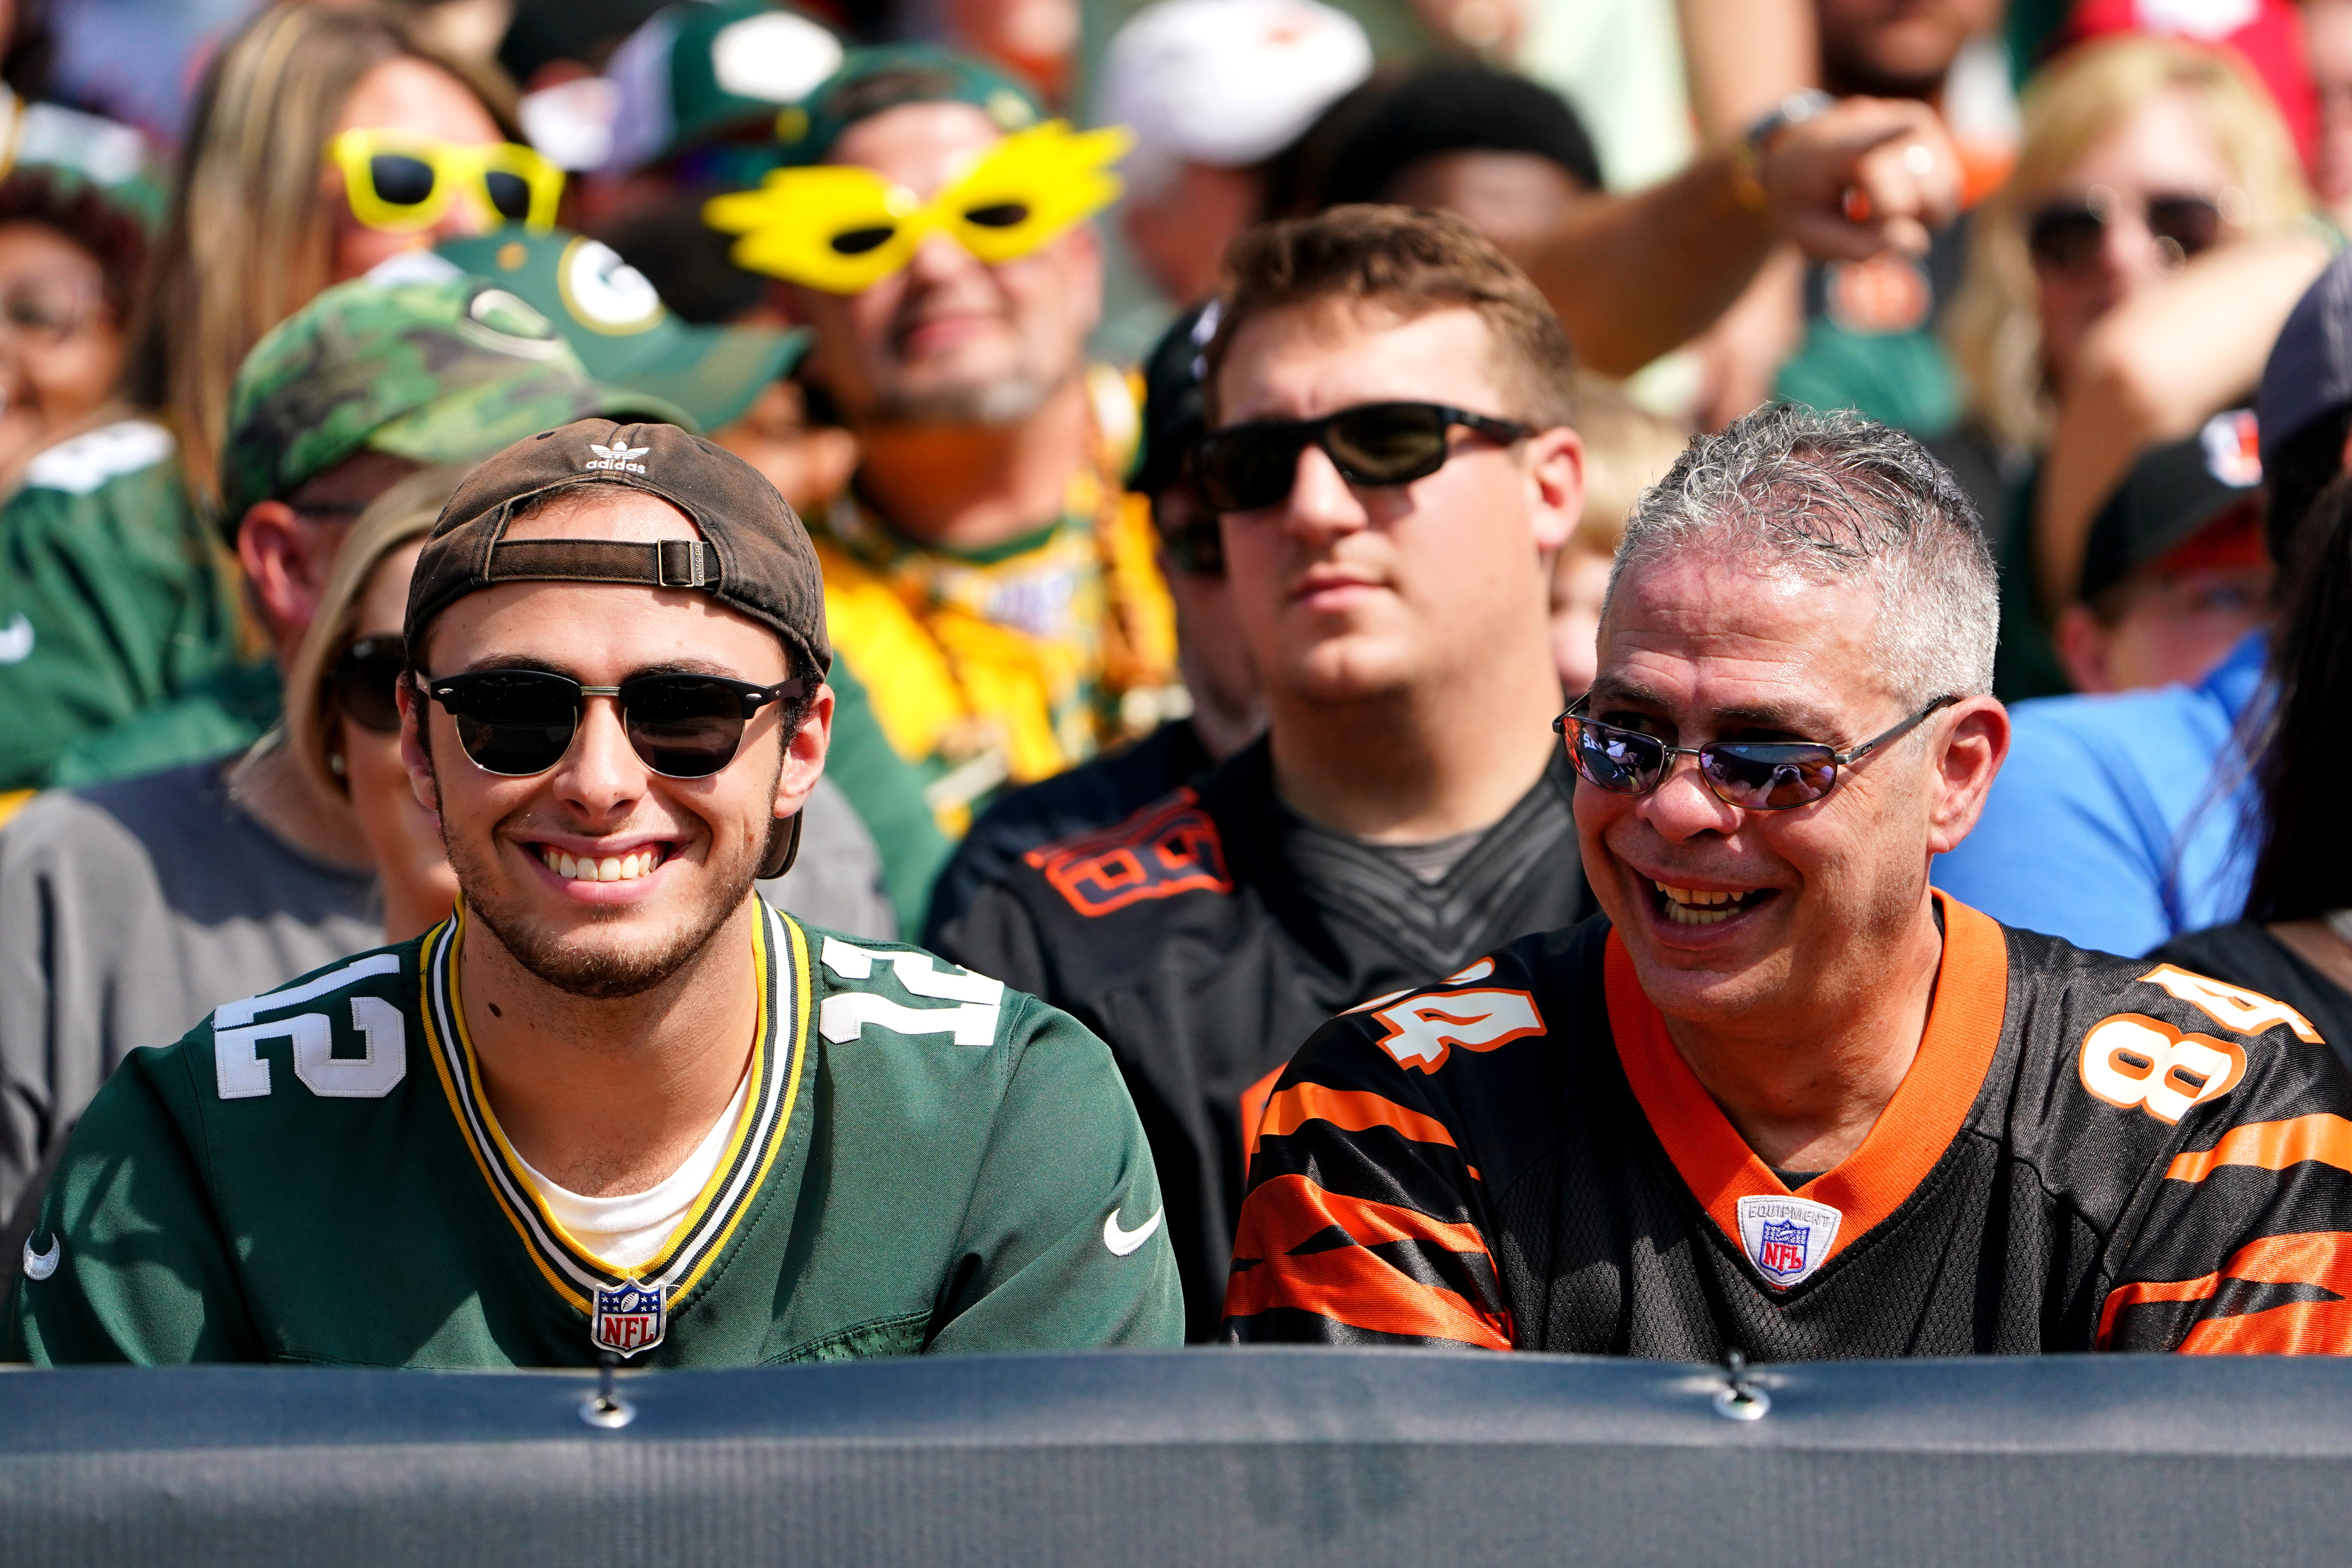 A Green Bay Packers fan and Cincinnati Bengals share a laugh in the first quarter of a Week 5 NFL football game between the Green Bay Packers and the Cincinnati Bengals, Sunday, Oct. 10, 2021, at Paul Brown Stadium in Cincinnati.